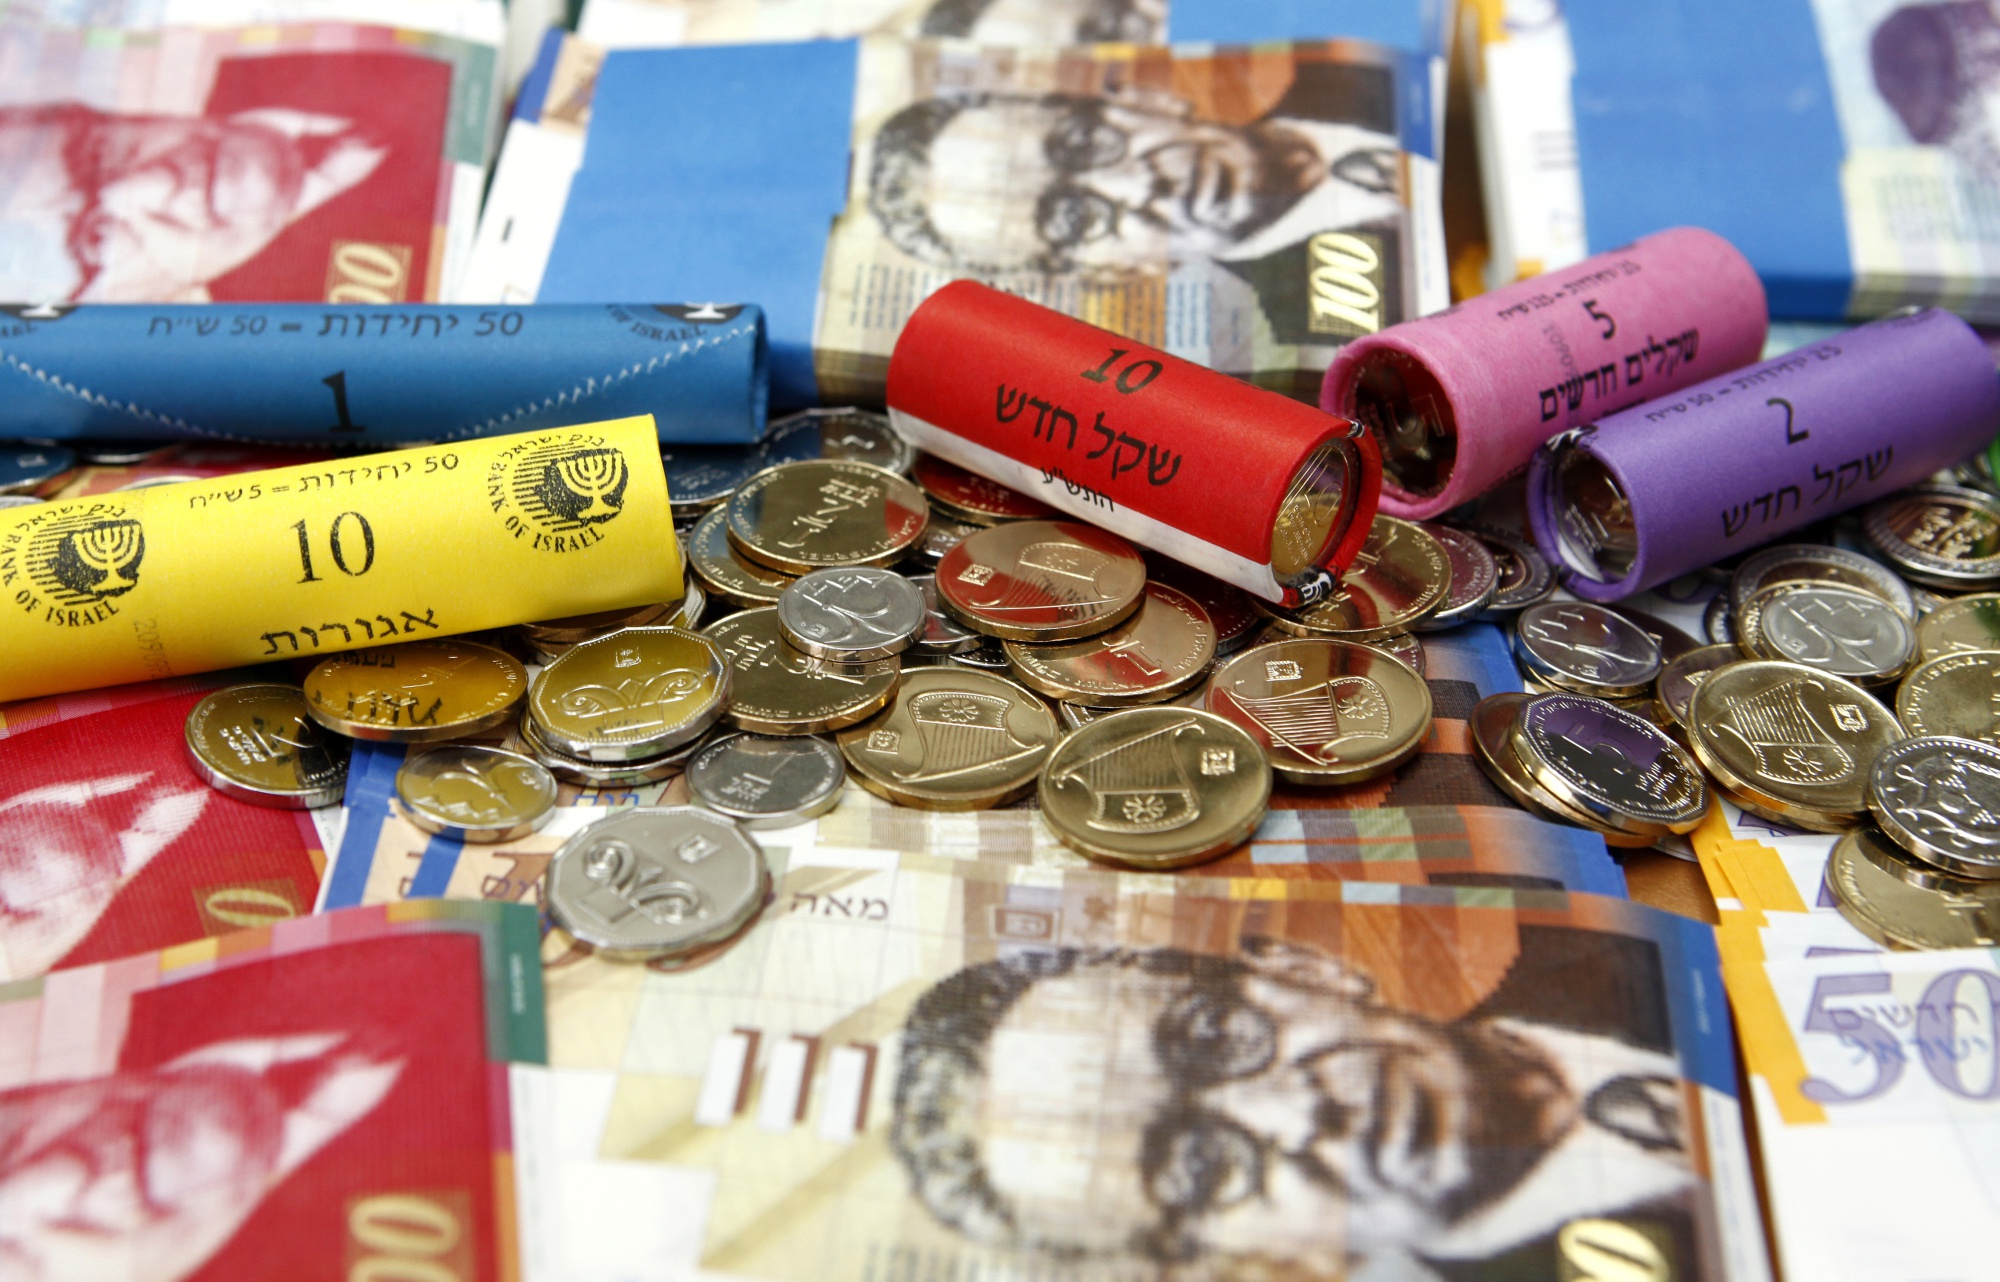 Mixed denomination Shekel currency banknotes and tubes of coins